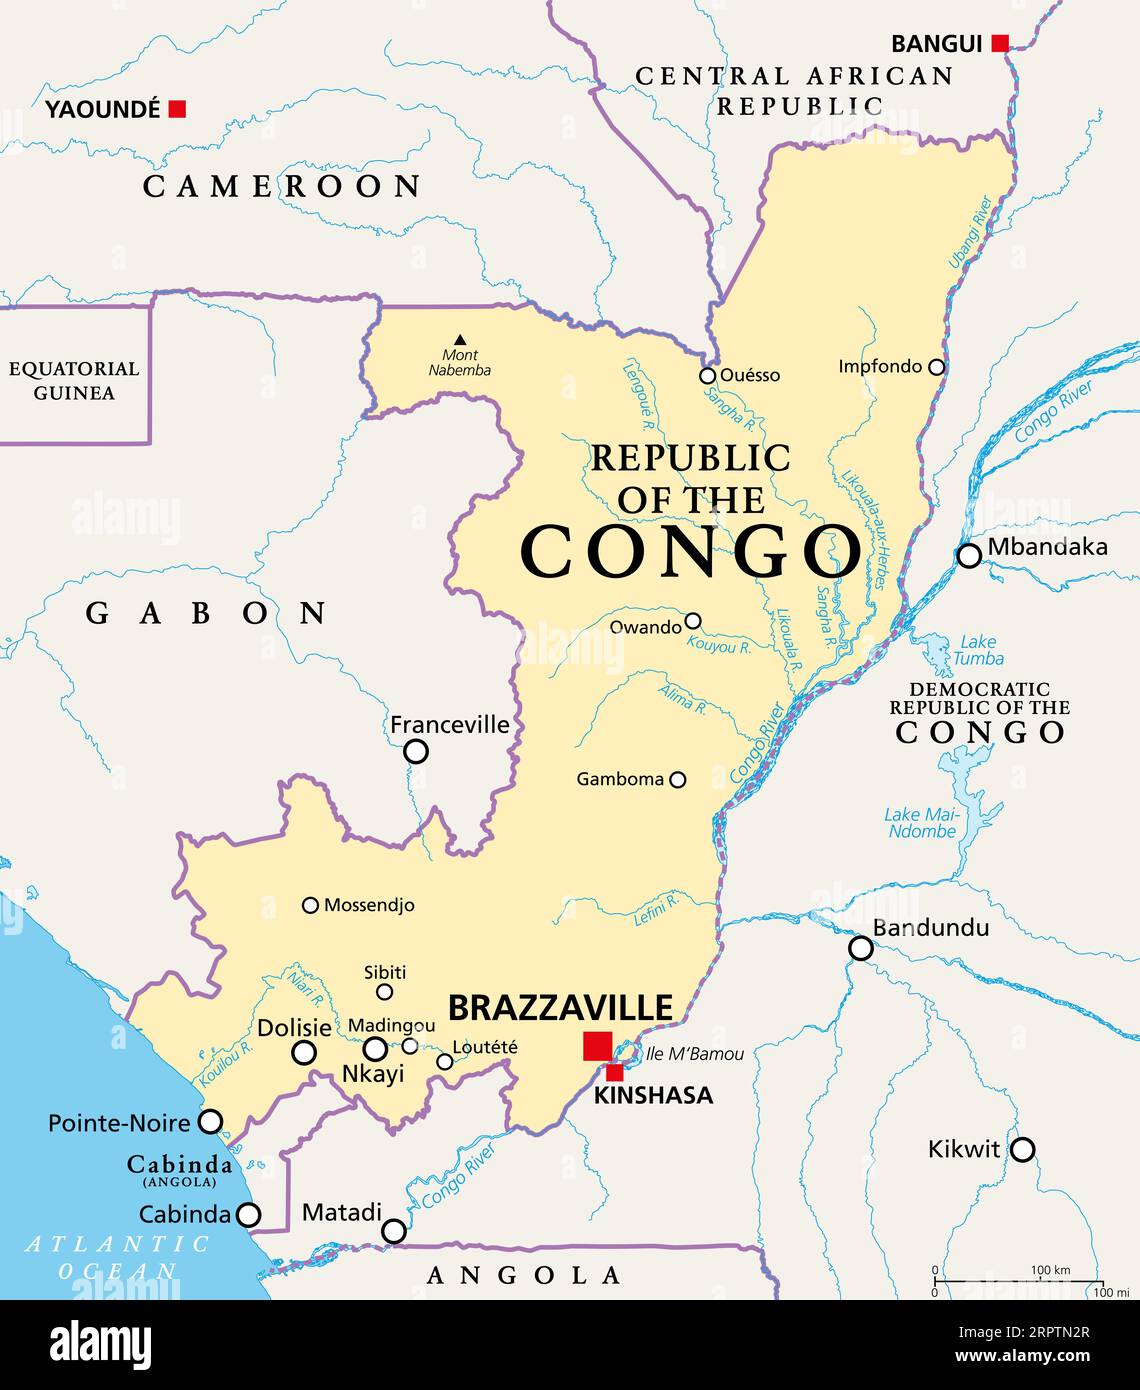 Republic of the Congo, political map. Also known as the Congo, is a country located on the western coast of Central Africa, to the west of Congo River. Stock Photo